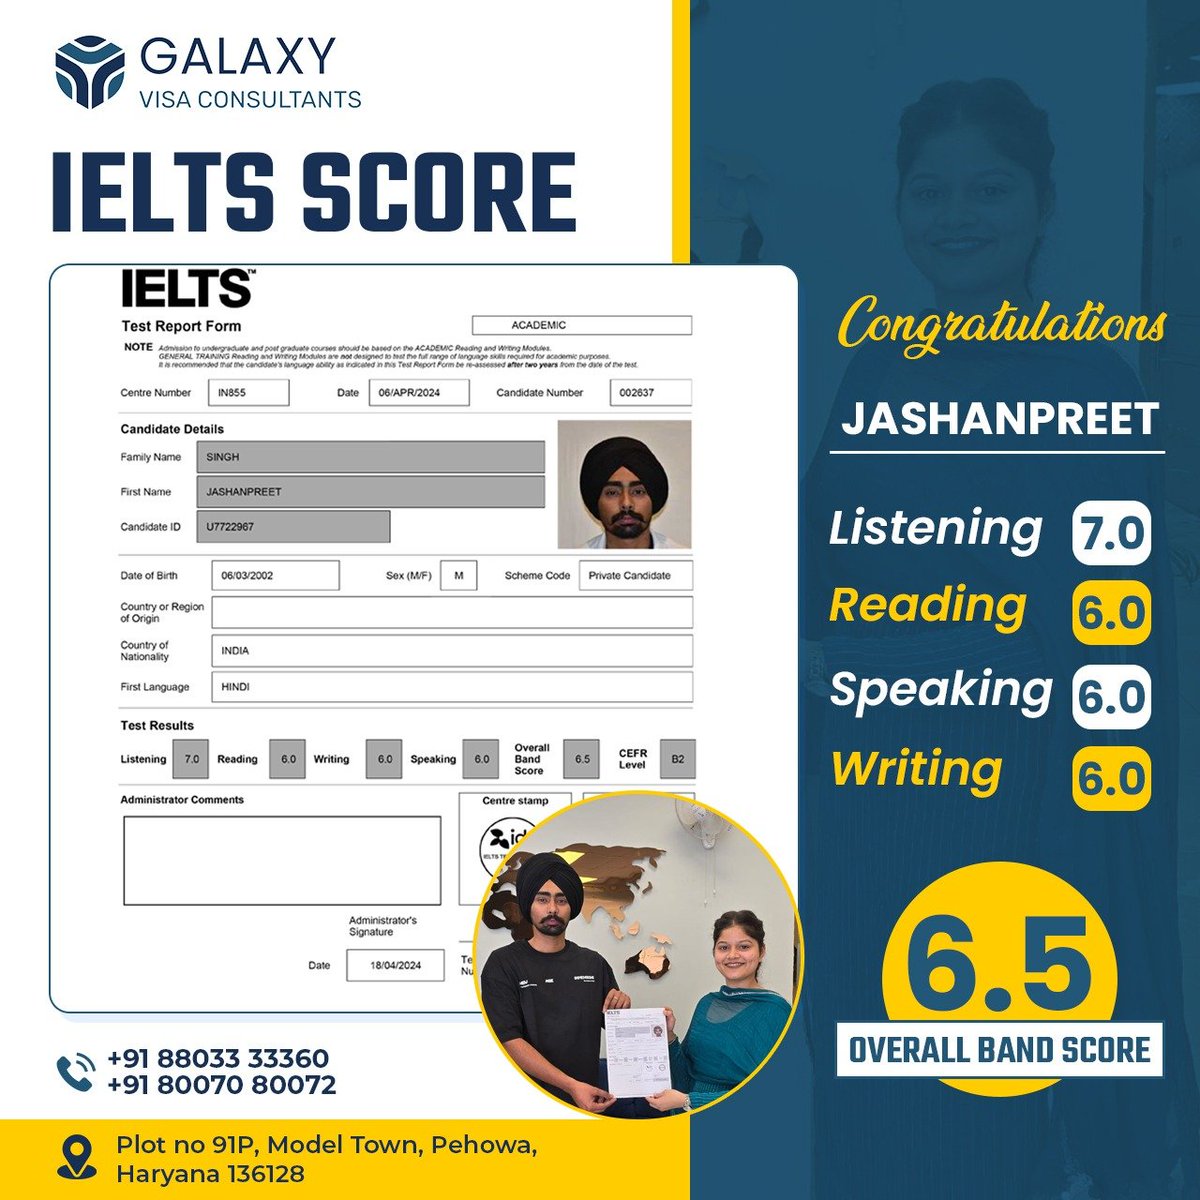 📷 Congratulations, Jashanpreet, on achieving a remarkable 6.5 band score in the IELTS exam! 📷 Keep inspiring with Galaxy Visa Consultant! 📷
📷Contact us at +91 8803333360, 8007080072
#galaxyvisaconsultant #ielts #ieltsexam #Congratulations #pehowa #ieltsscore